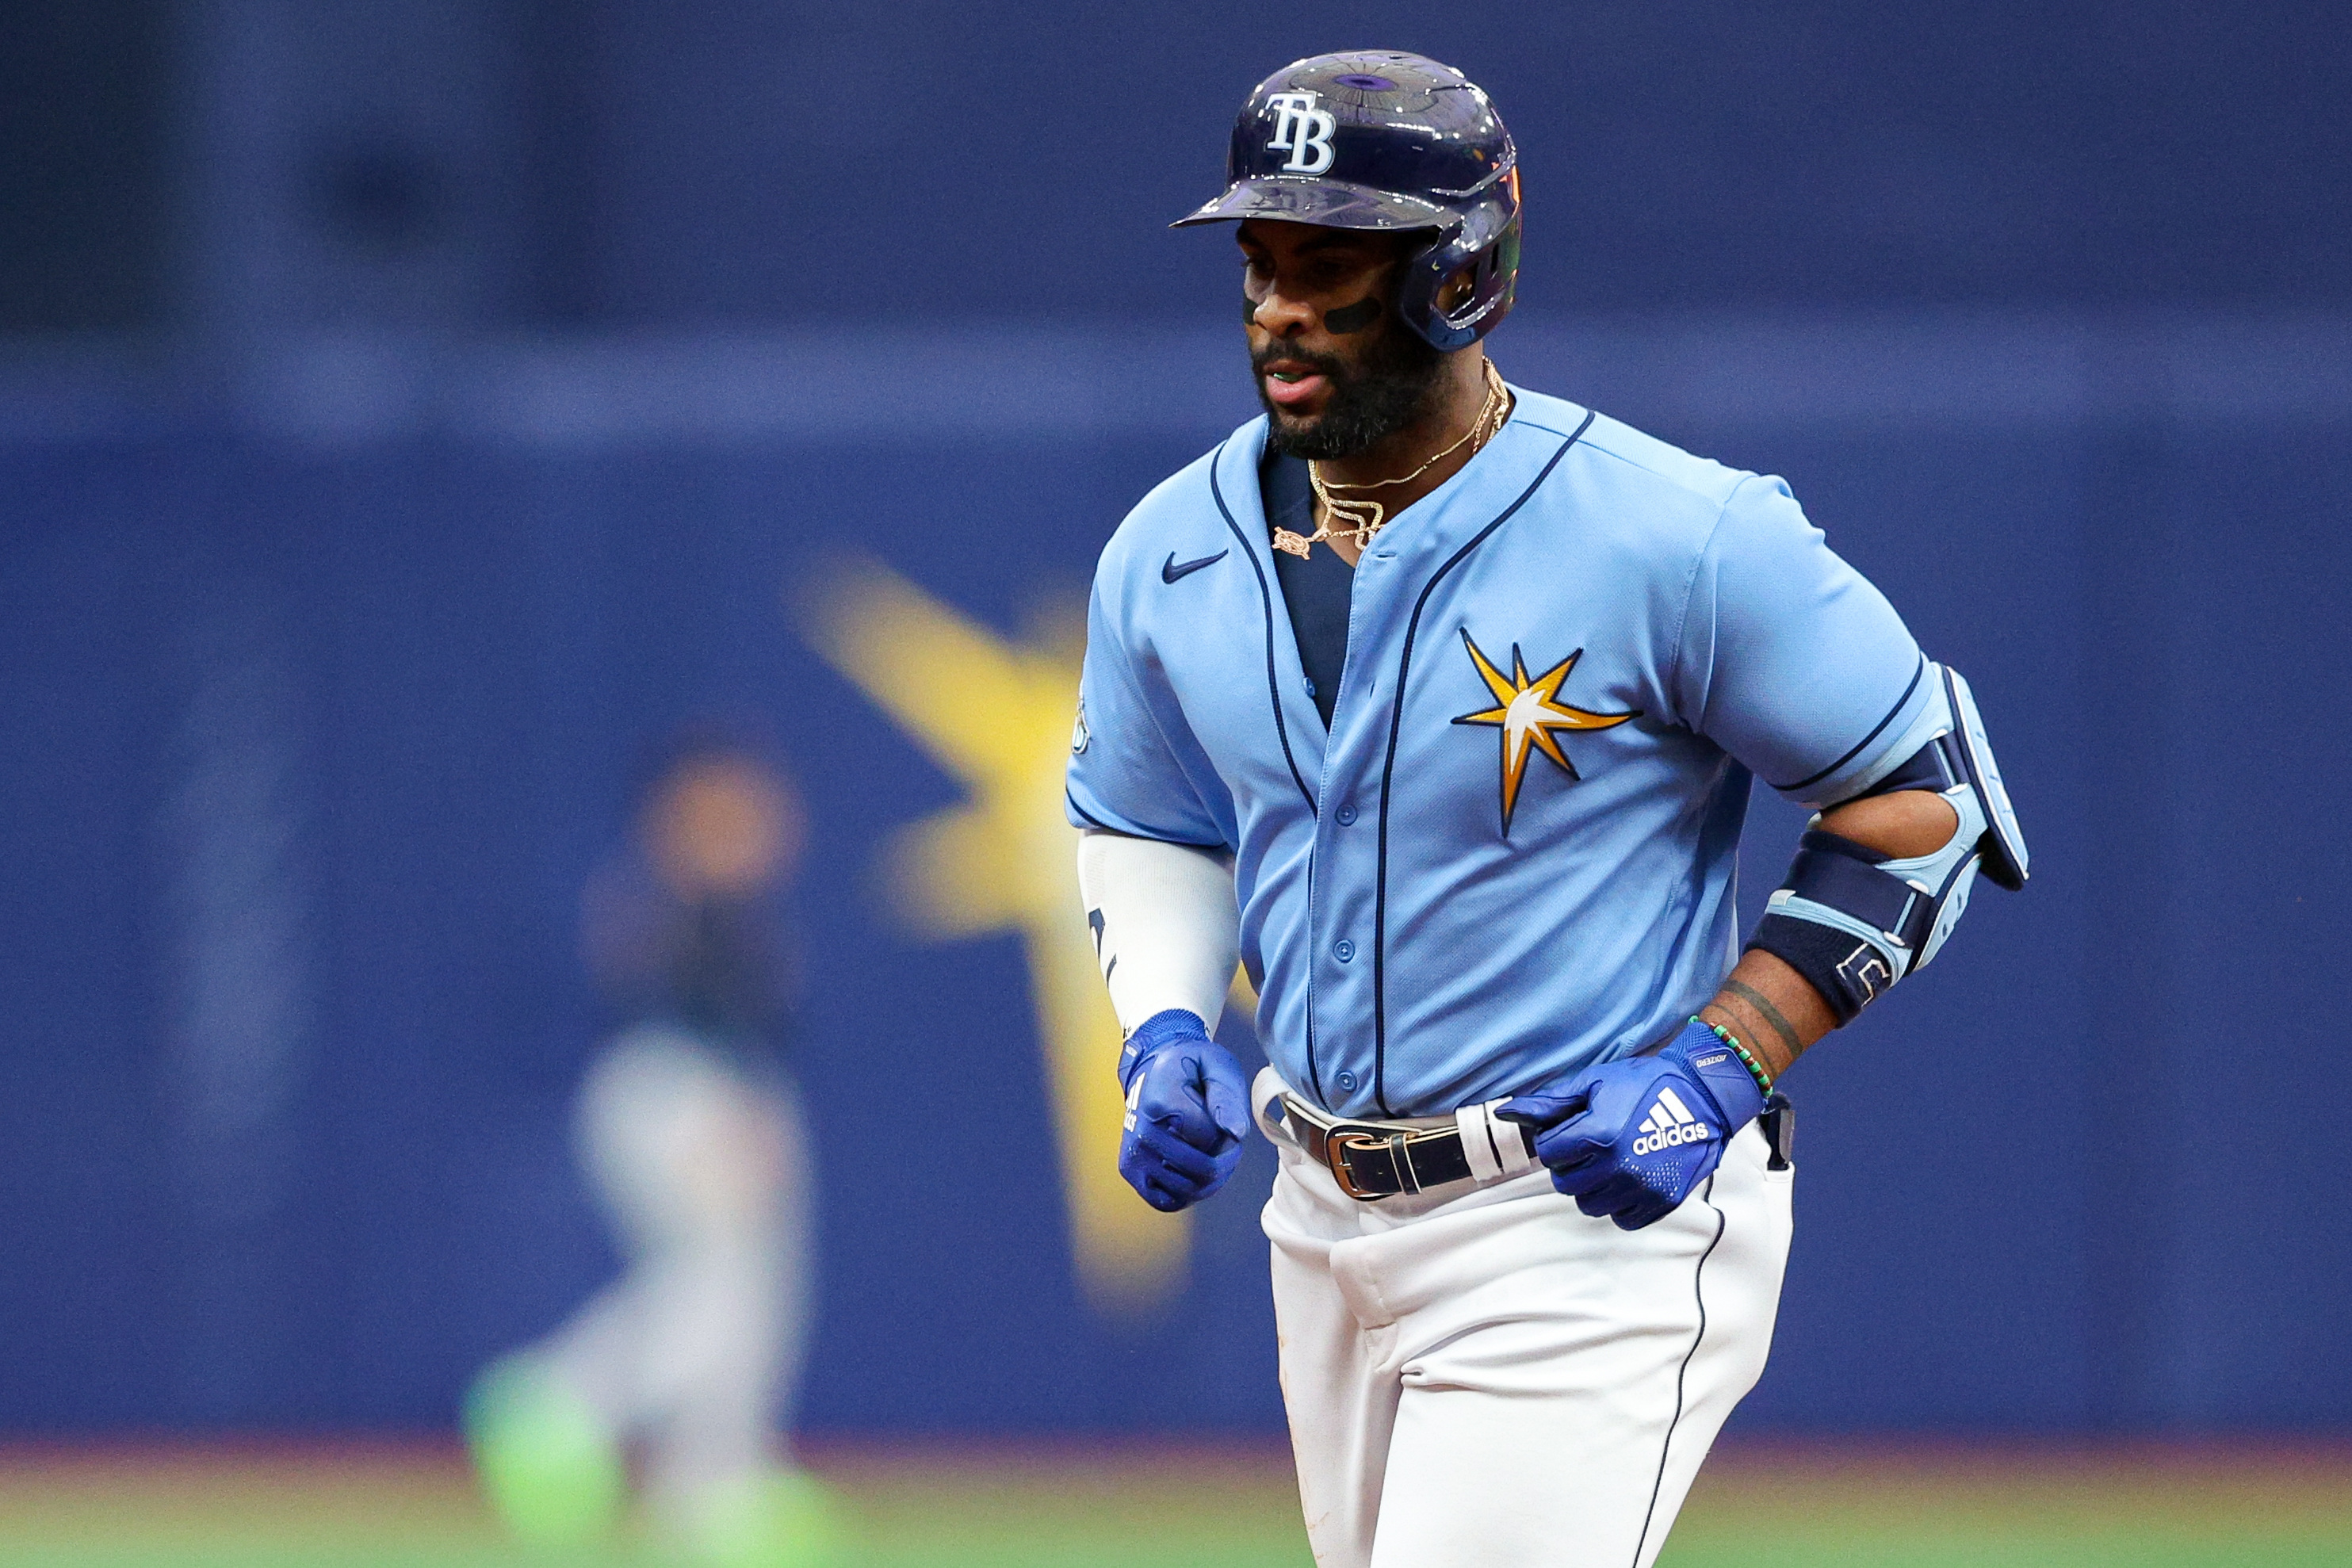 Rays drub Red Sox, tie MLB mark with 13th straight win